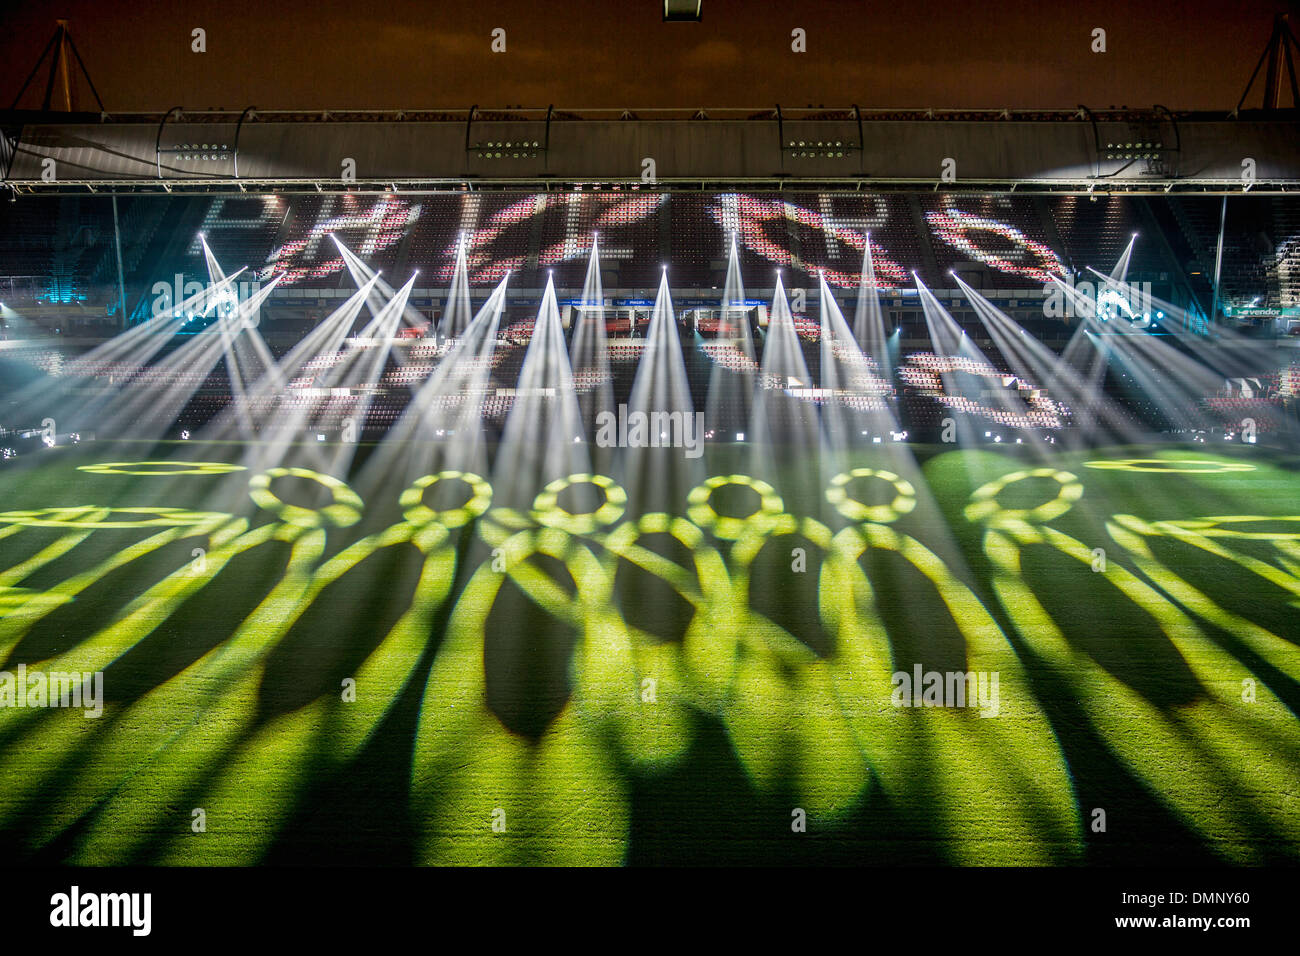 Netherlands, Eindhoven, Light festival called GLOW 2013. Project Clashlight in the Philips PSV football stadium Stock Photo